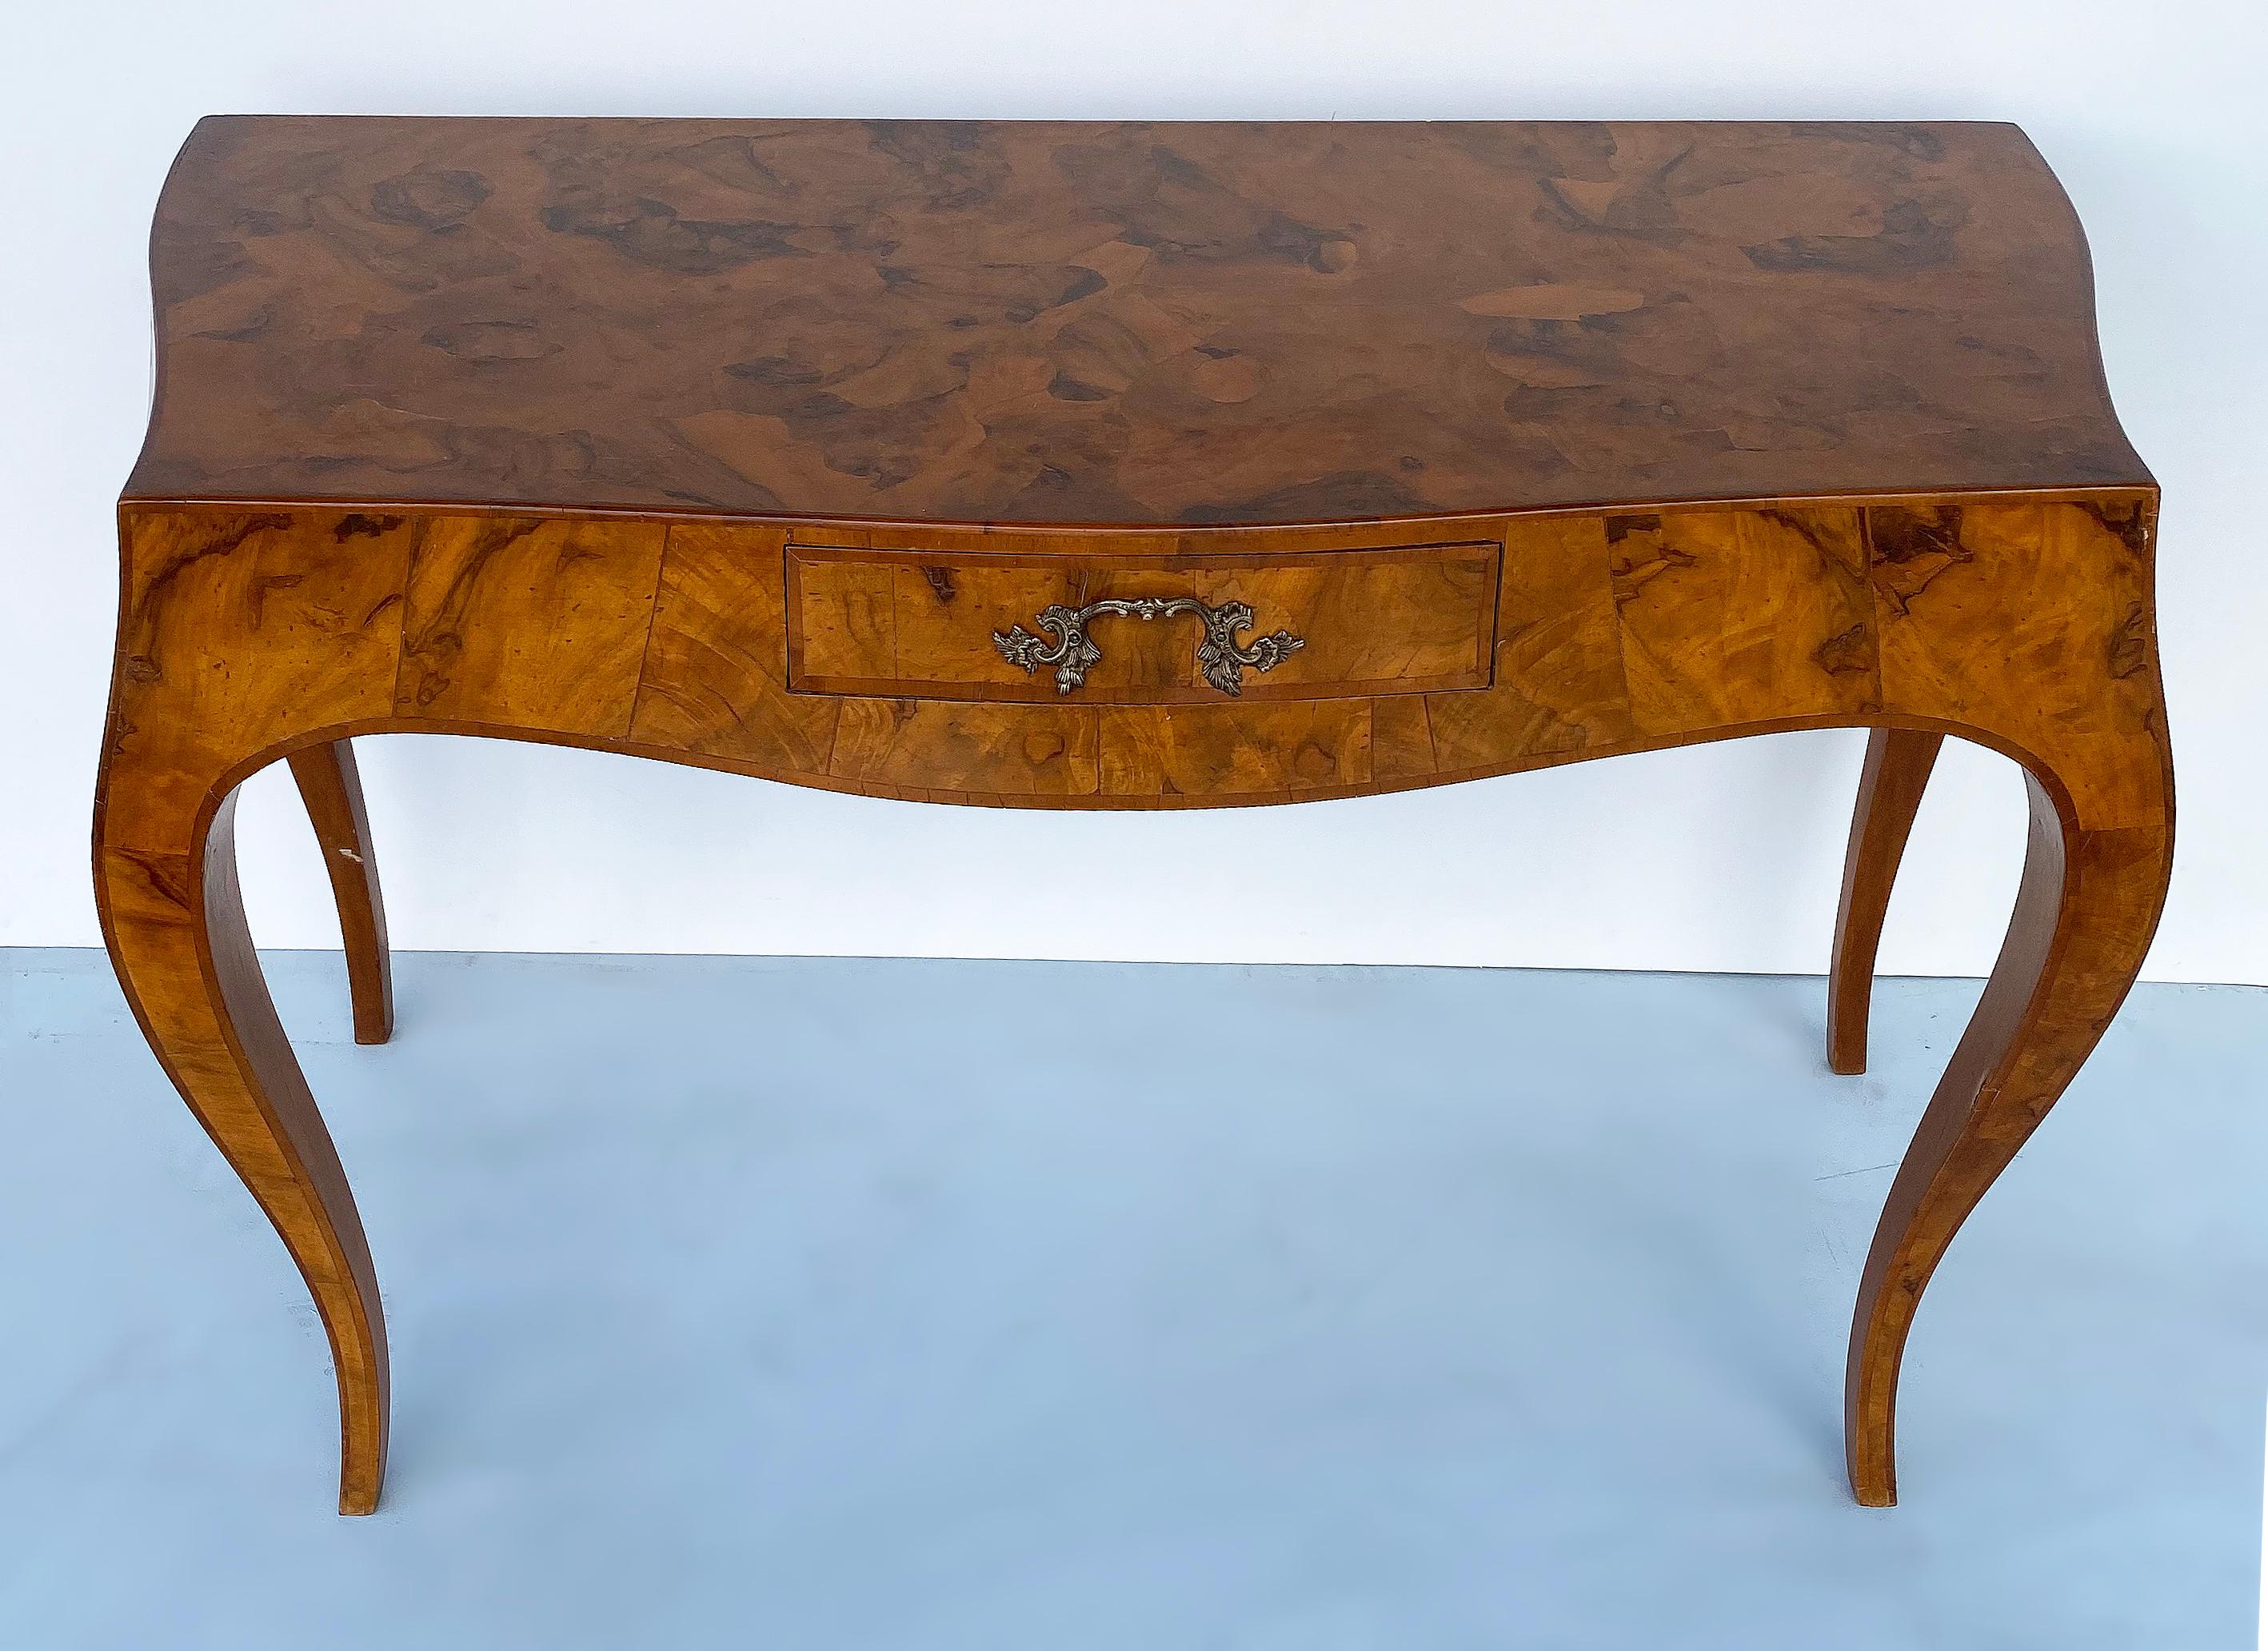 Vintage Italian olive wood writing desk.

Offered for sale is an elegant Italian olive wood desk with a single drawer. Beautifully grained wood with curved splayed legs. The desk is wrapped in a patchwork of fitted olive wood patterned pieces